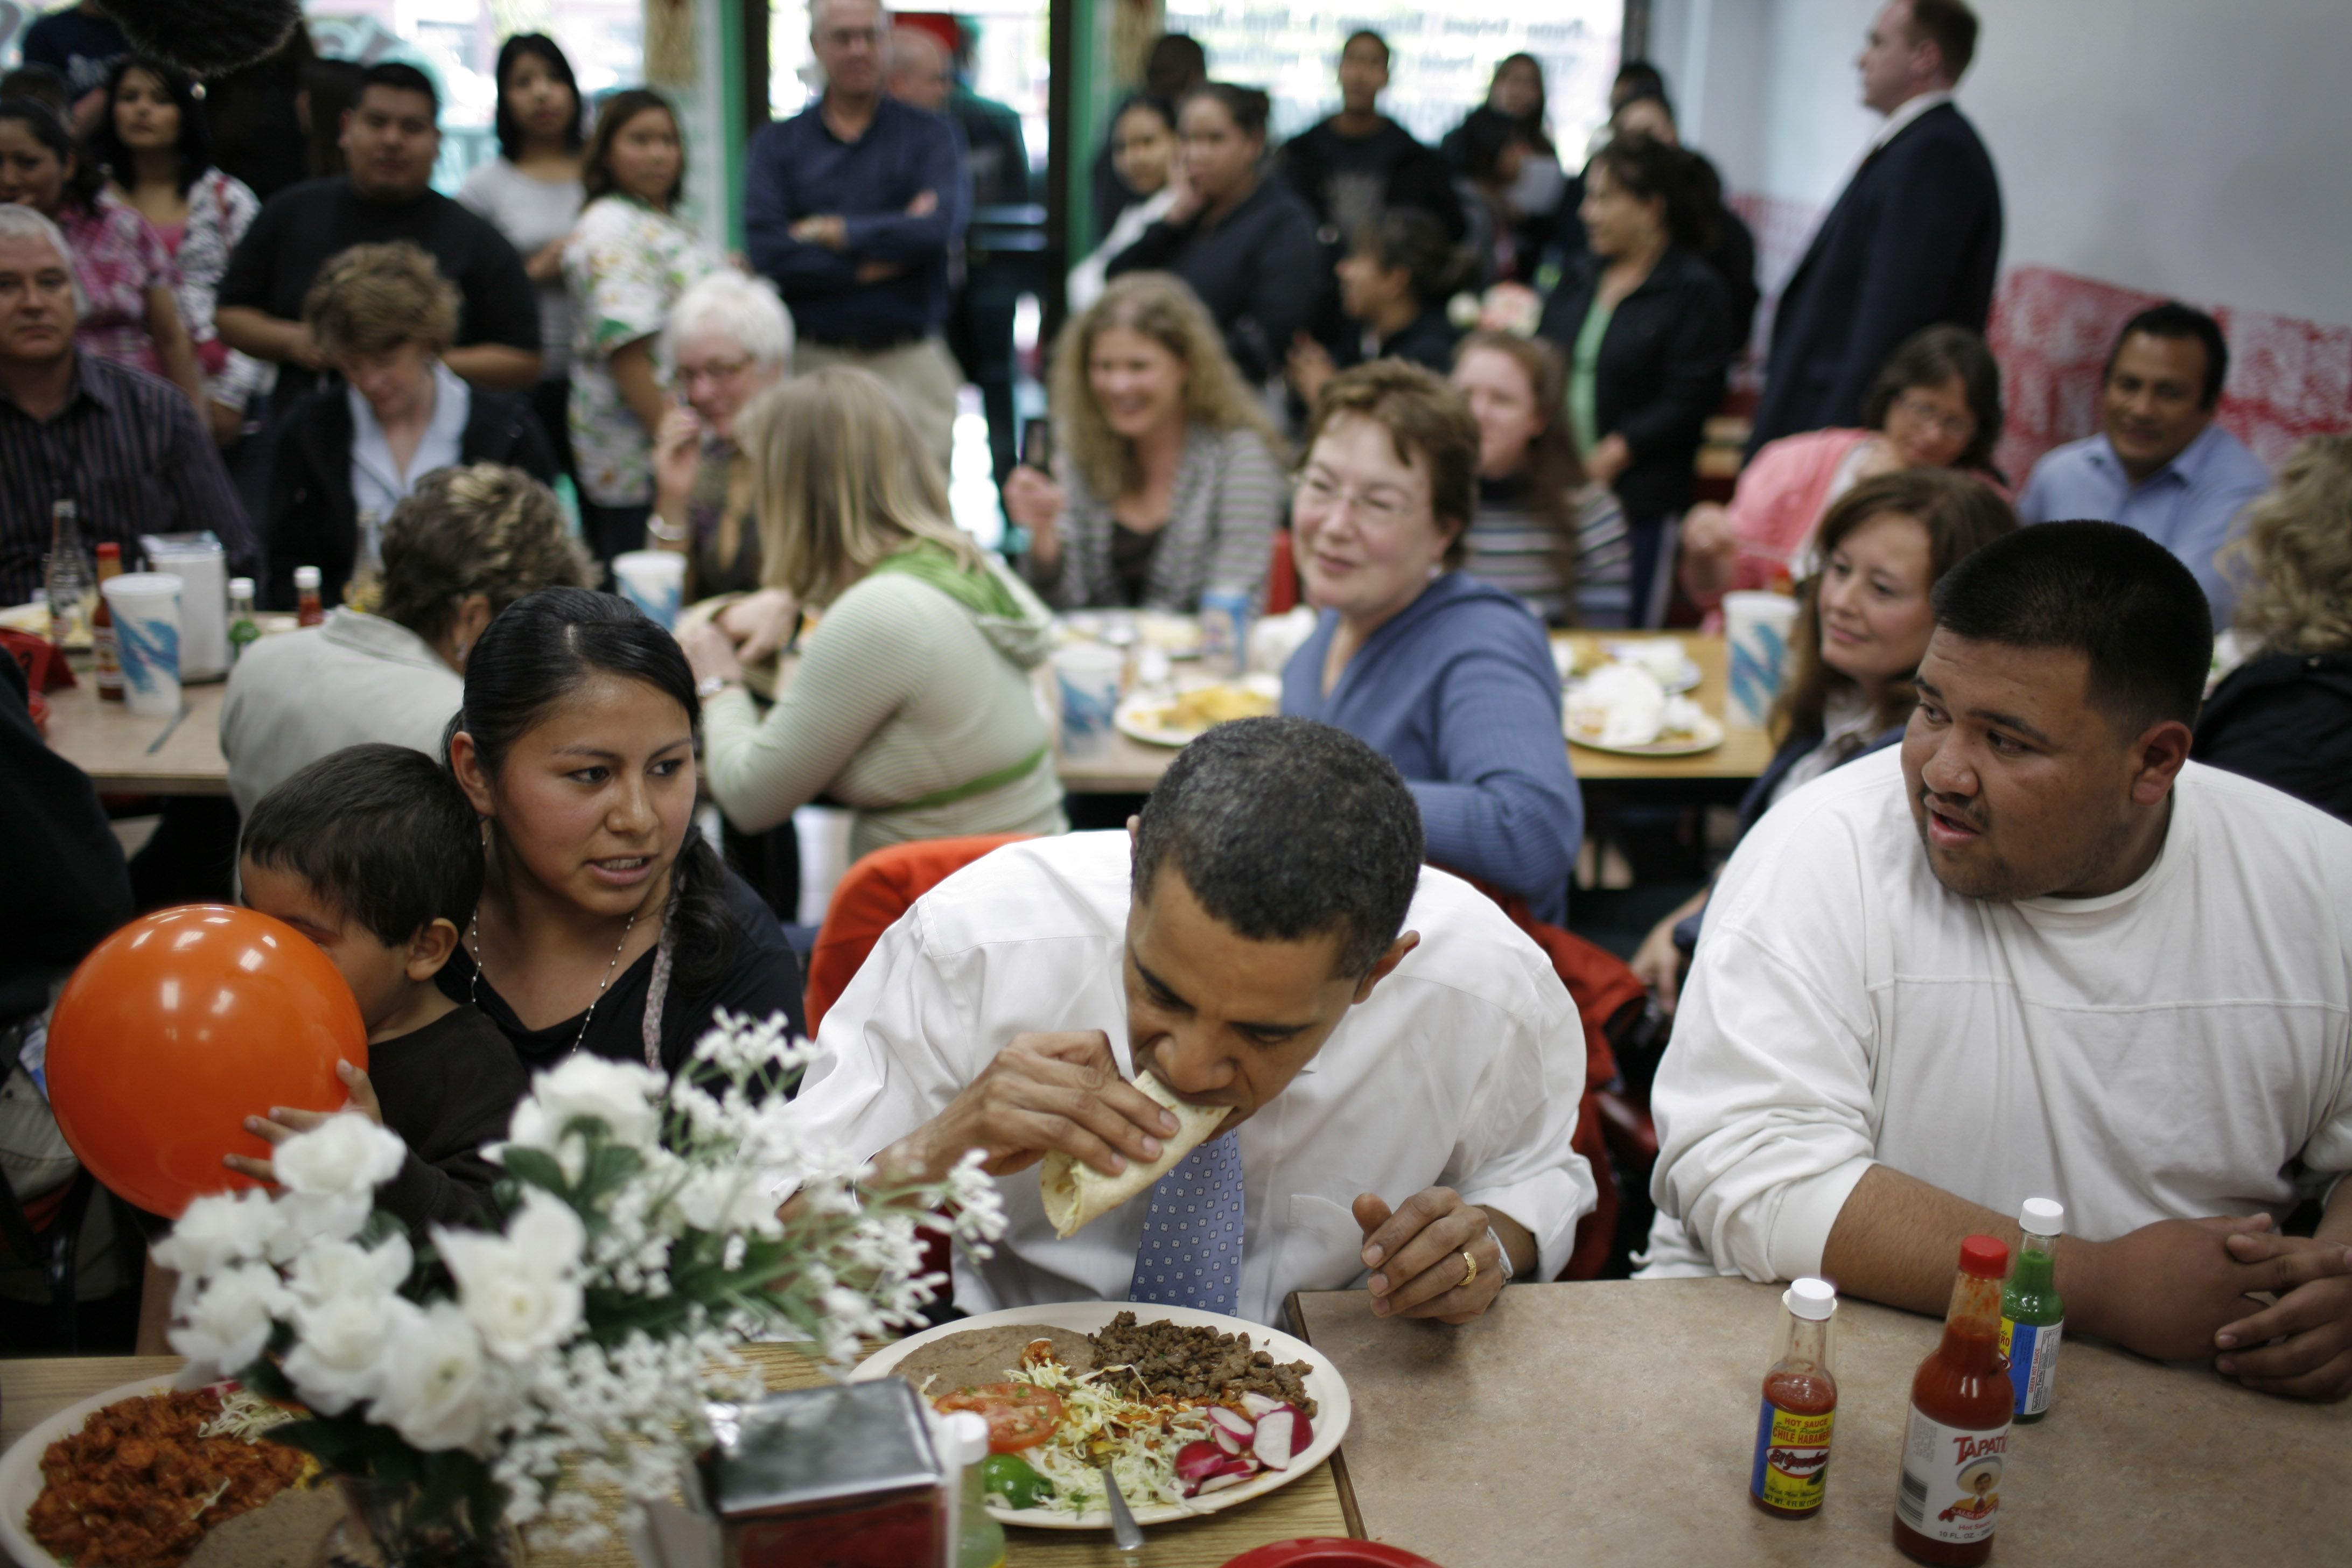 Then-Democratic presidential hopeful Sen. Barack Obama (D-IL) has lunch at Luis's Taqueria Mexican Resturaunt, May 9, 2008 in Woodburn, Oregon